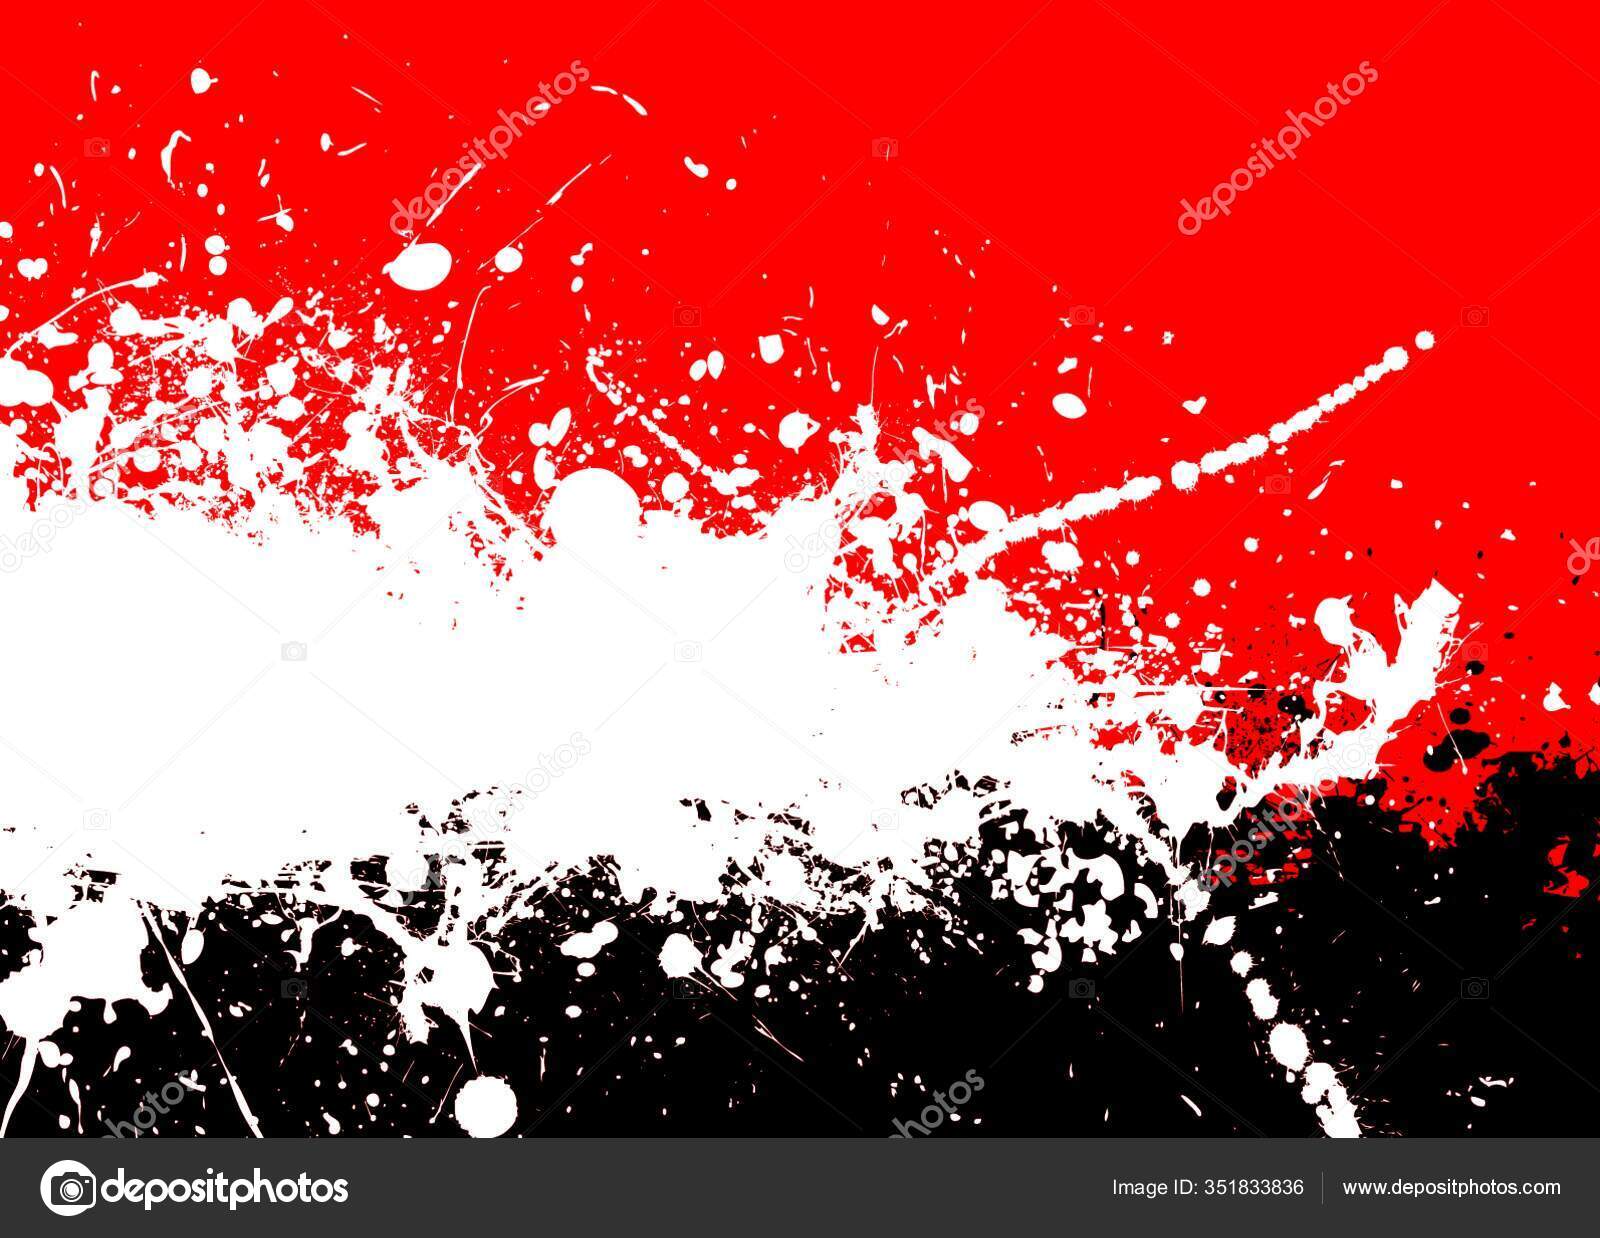 Red Black Abstract Background Ink Splats Stock Vector Image by  ©PantherMediaSeller #351833836